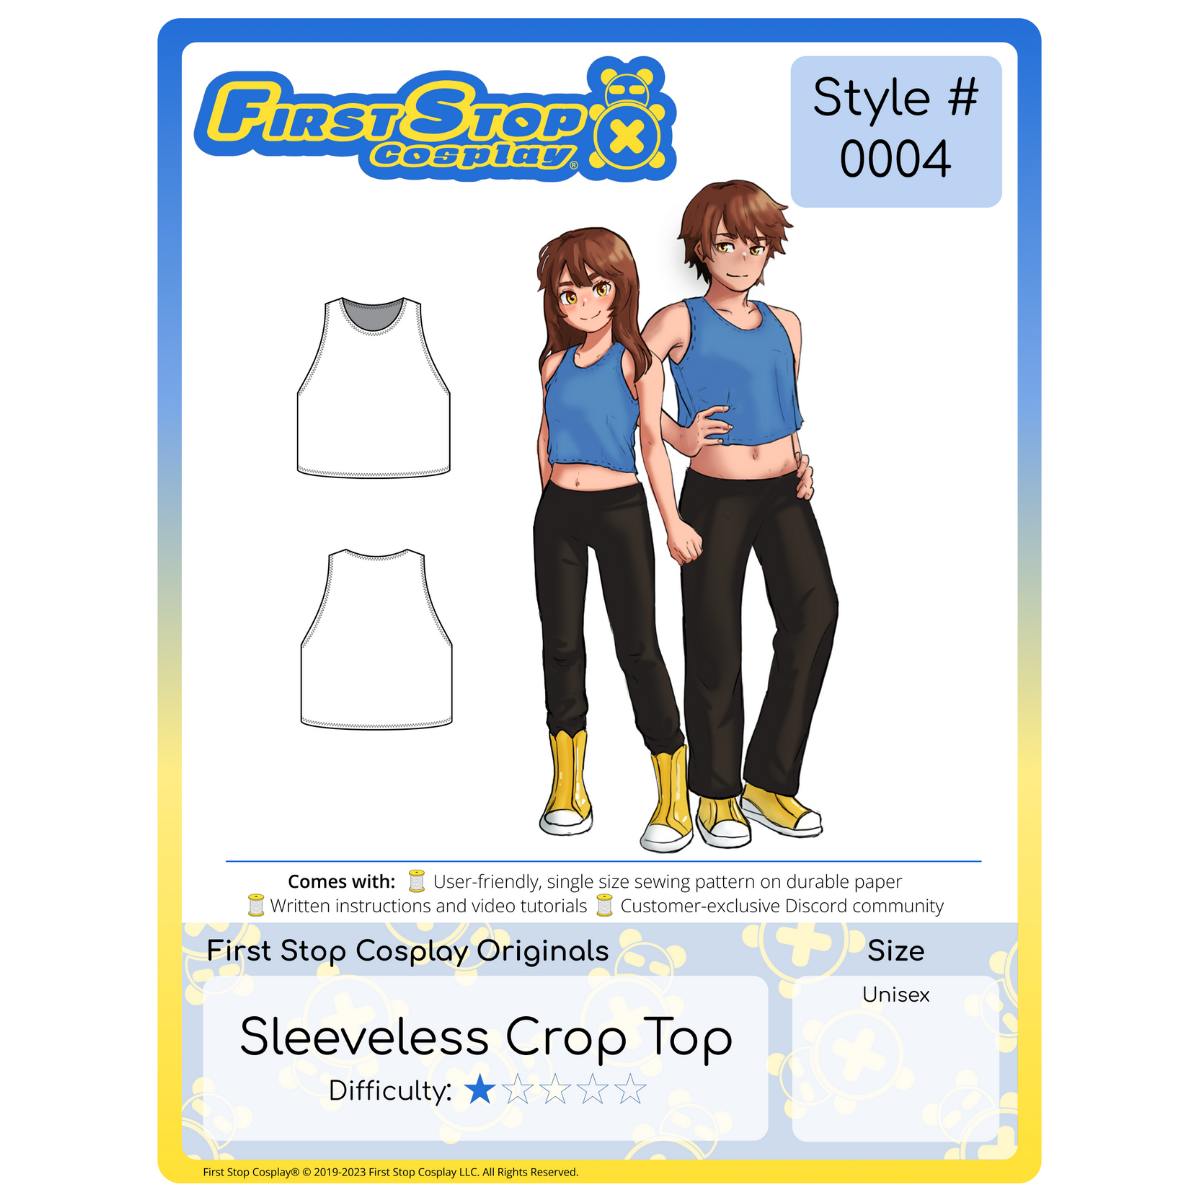 A graphic of the front packaging for Style #0004- Sleeveless Crop Top. The First Stop Cosplay logo is in the top left corner. Below the logo is line art of the completed pattern. To the right is an image of our female & male characters, Pan & Dah, wearing the completed Sleeveless Crop Top with a black pants. This pattern is 1 star in difficulty rating and follows our unisex size chart.